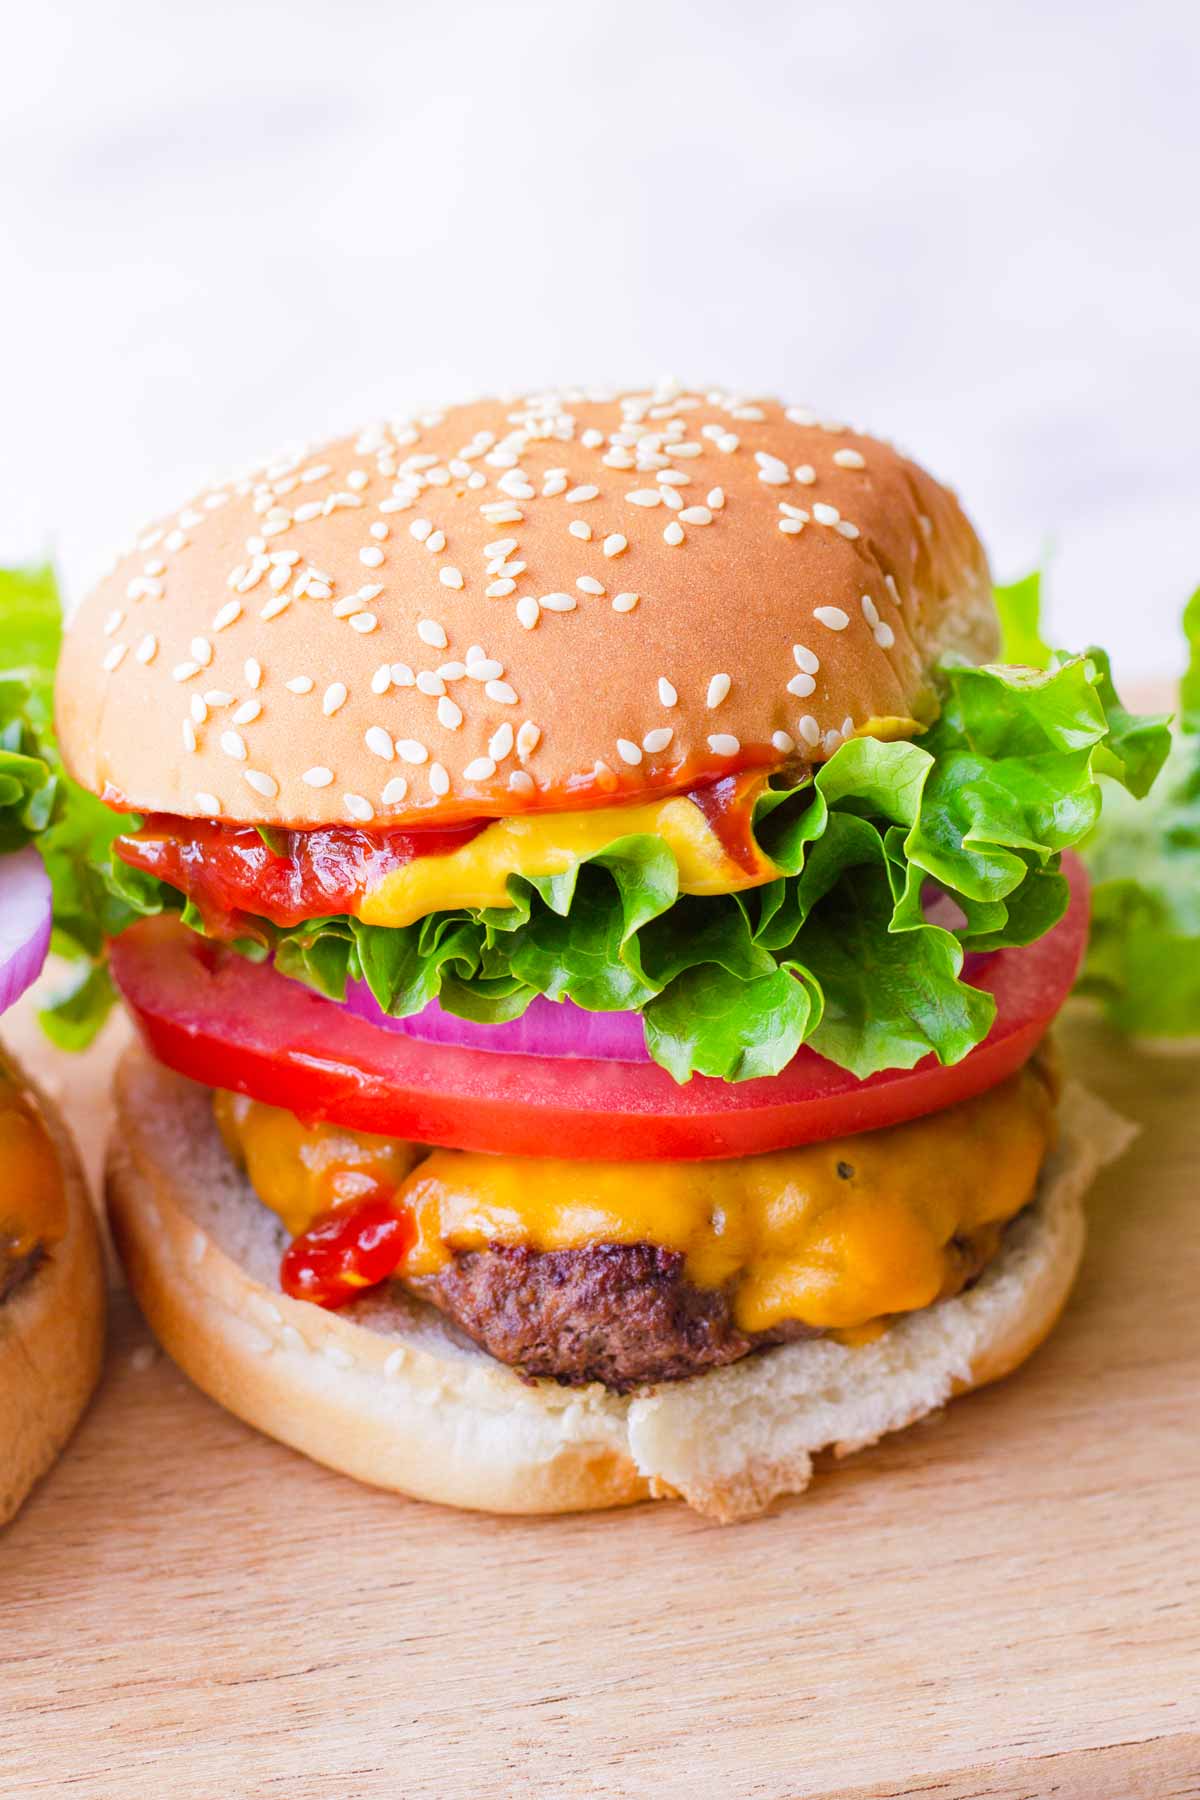 A classic American burger with cheese, lettuce, tomato, and onions